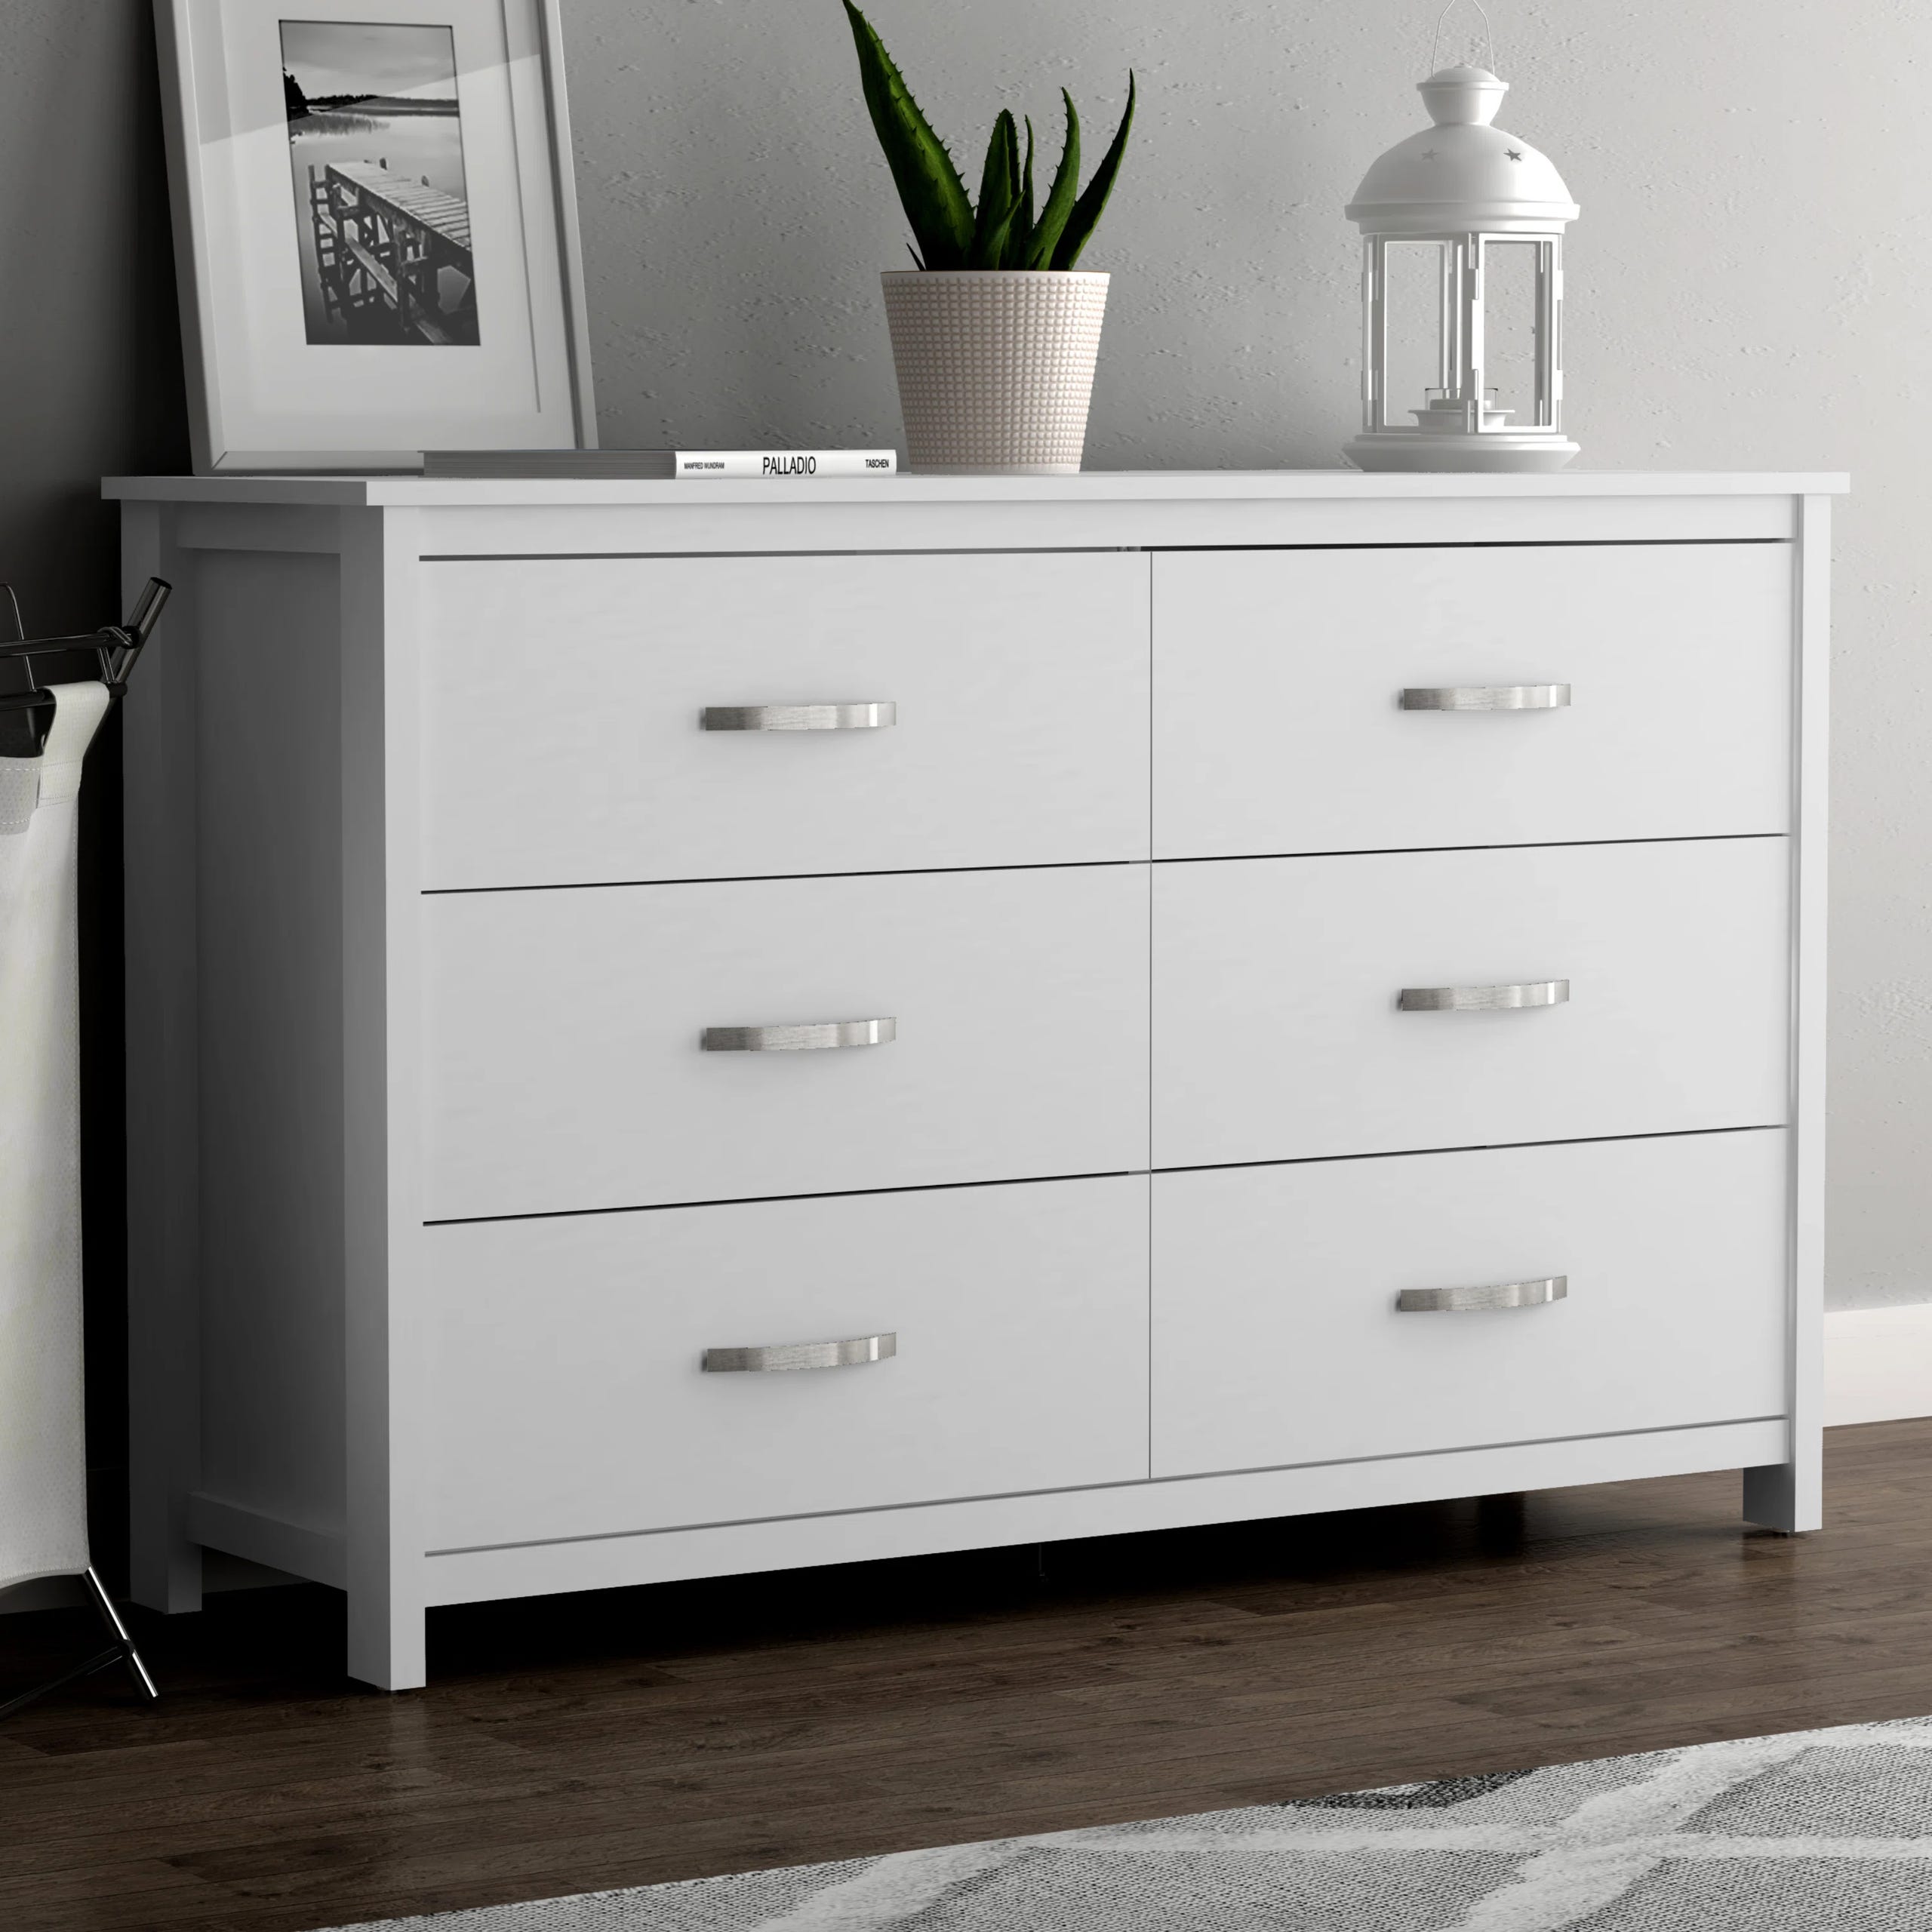 A white six-drawer dresser, with silver handles, accompanied by a potted plant and a lantern on its top.